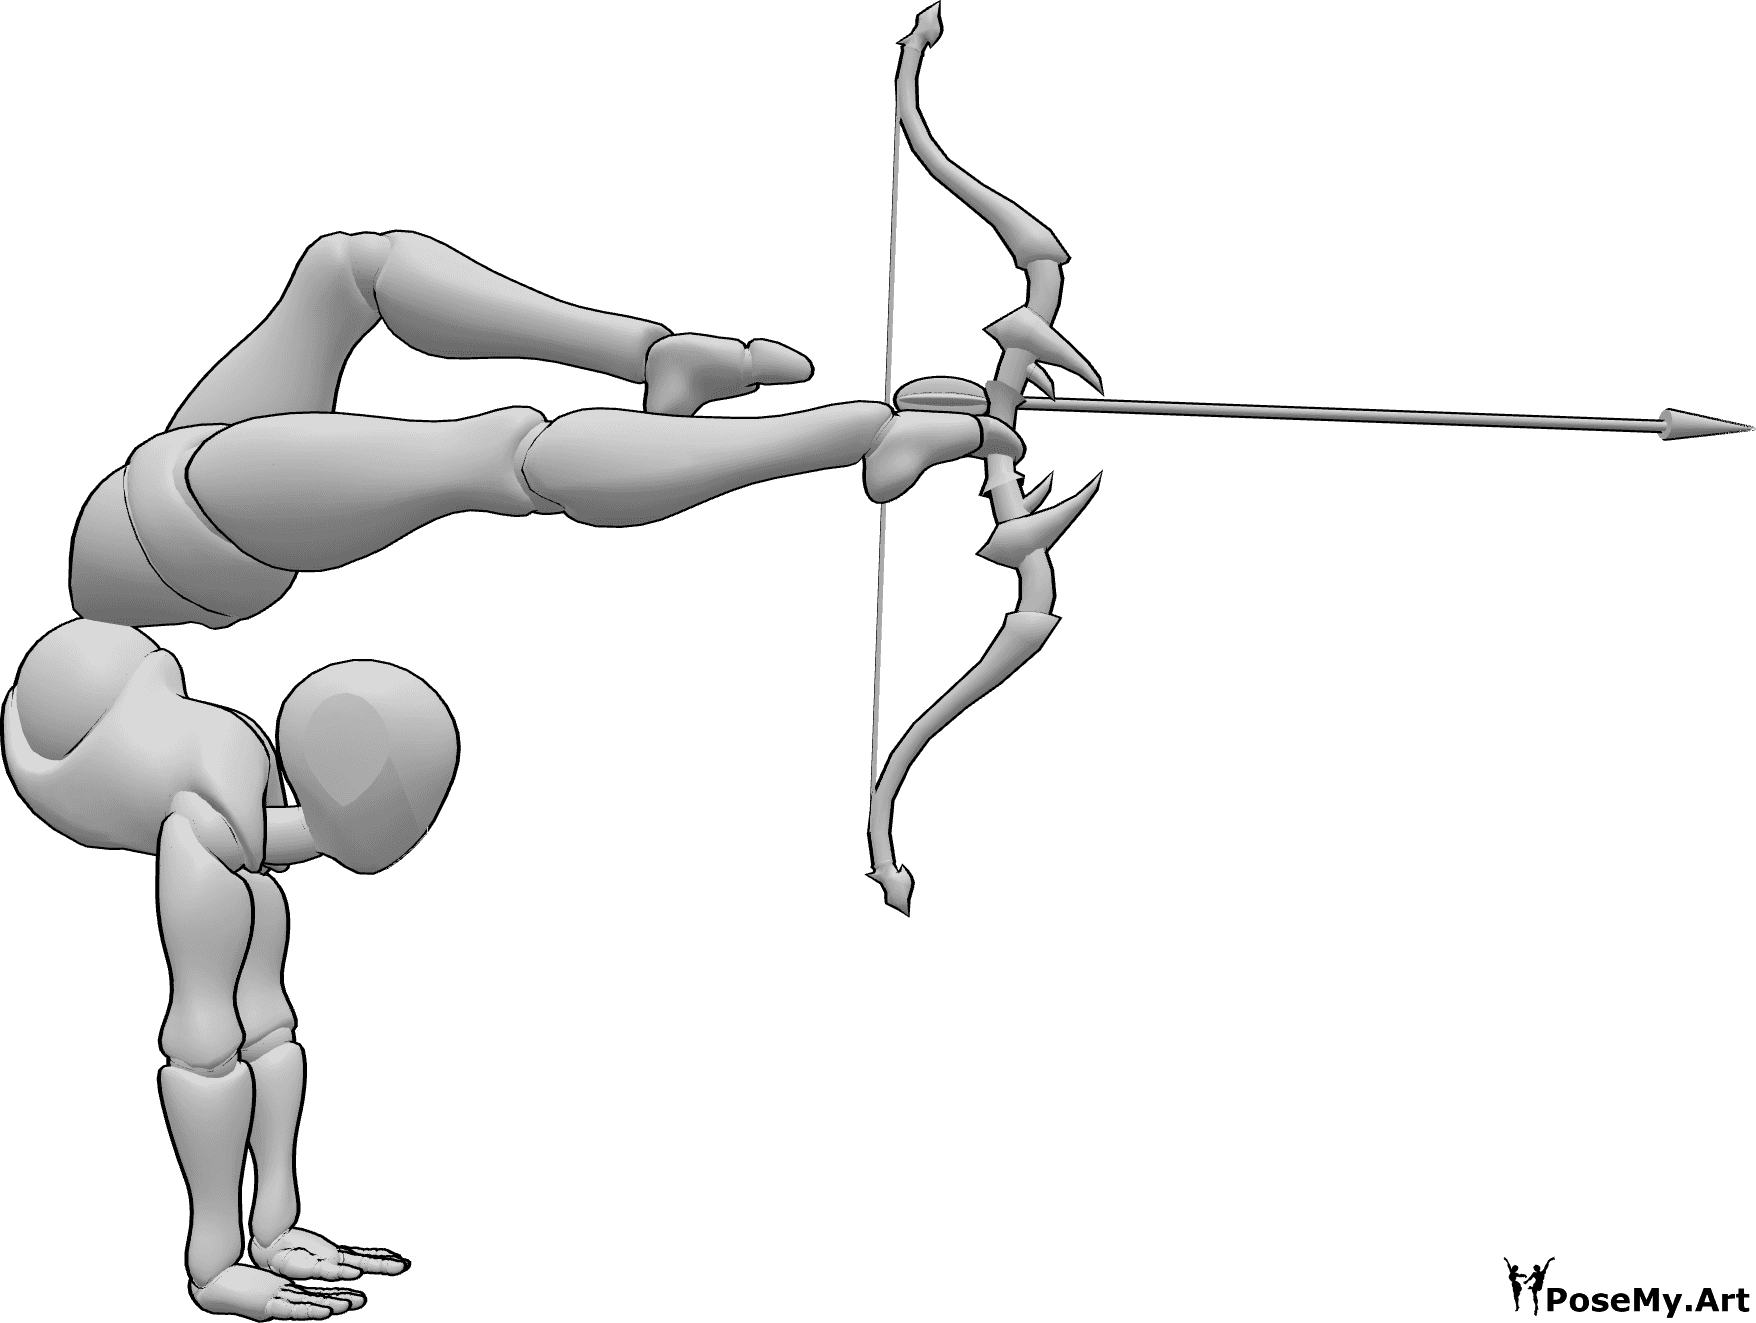 Pose Reference - Acrobatic shooting pose - Acrobatic archery pose, female is handstanding and shooting with her feet